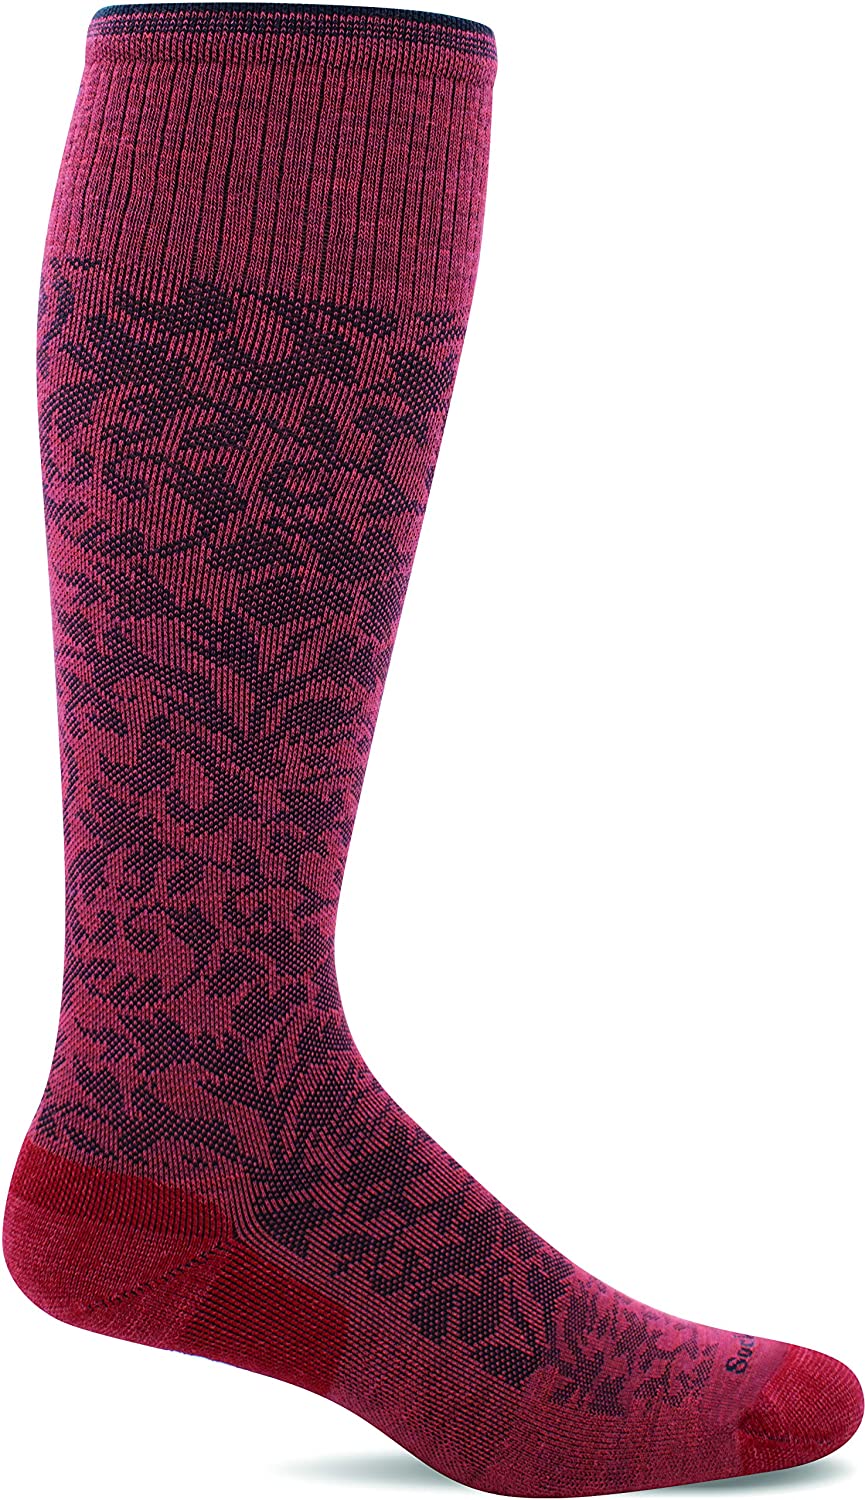 Sockwell Women's Damask Moderate Graduated Compression Sock in Red Rock from the side